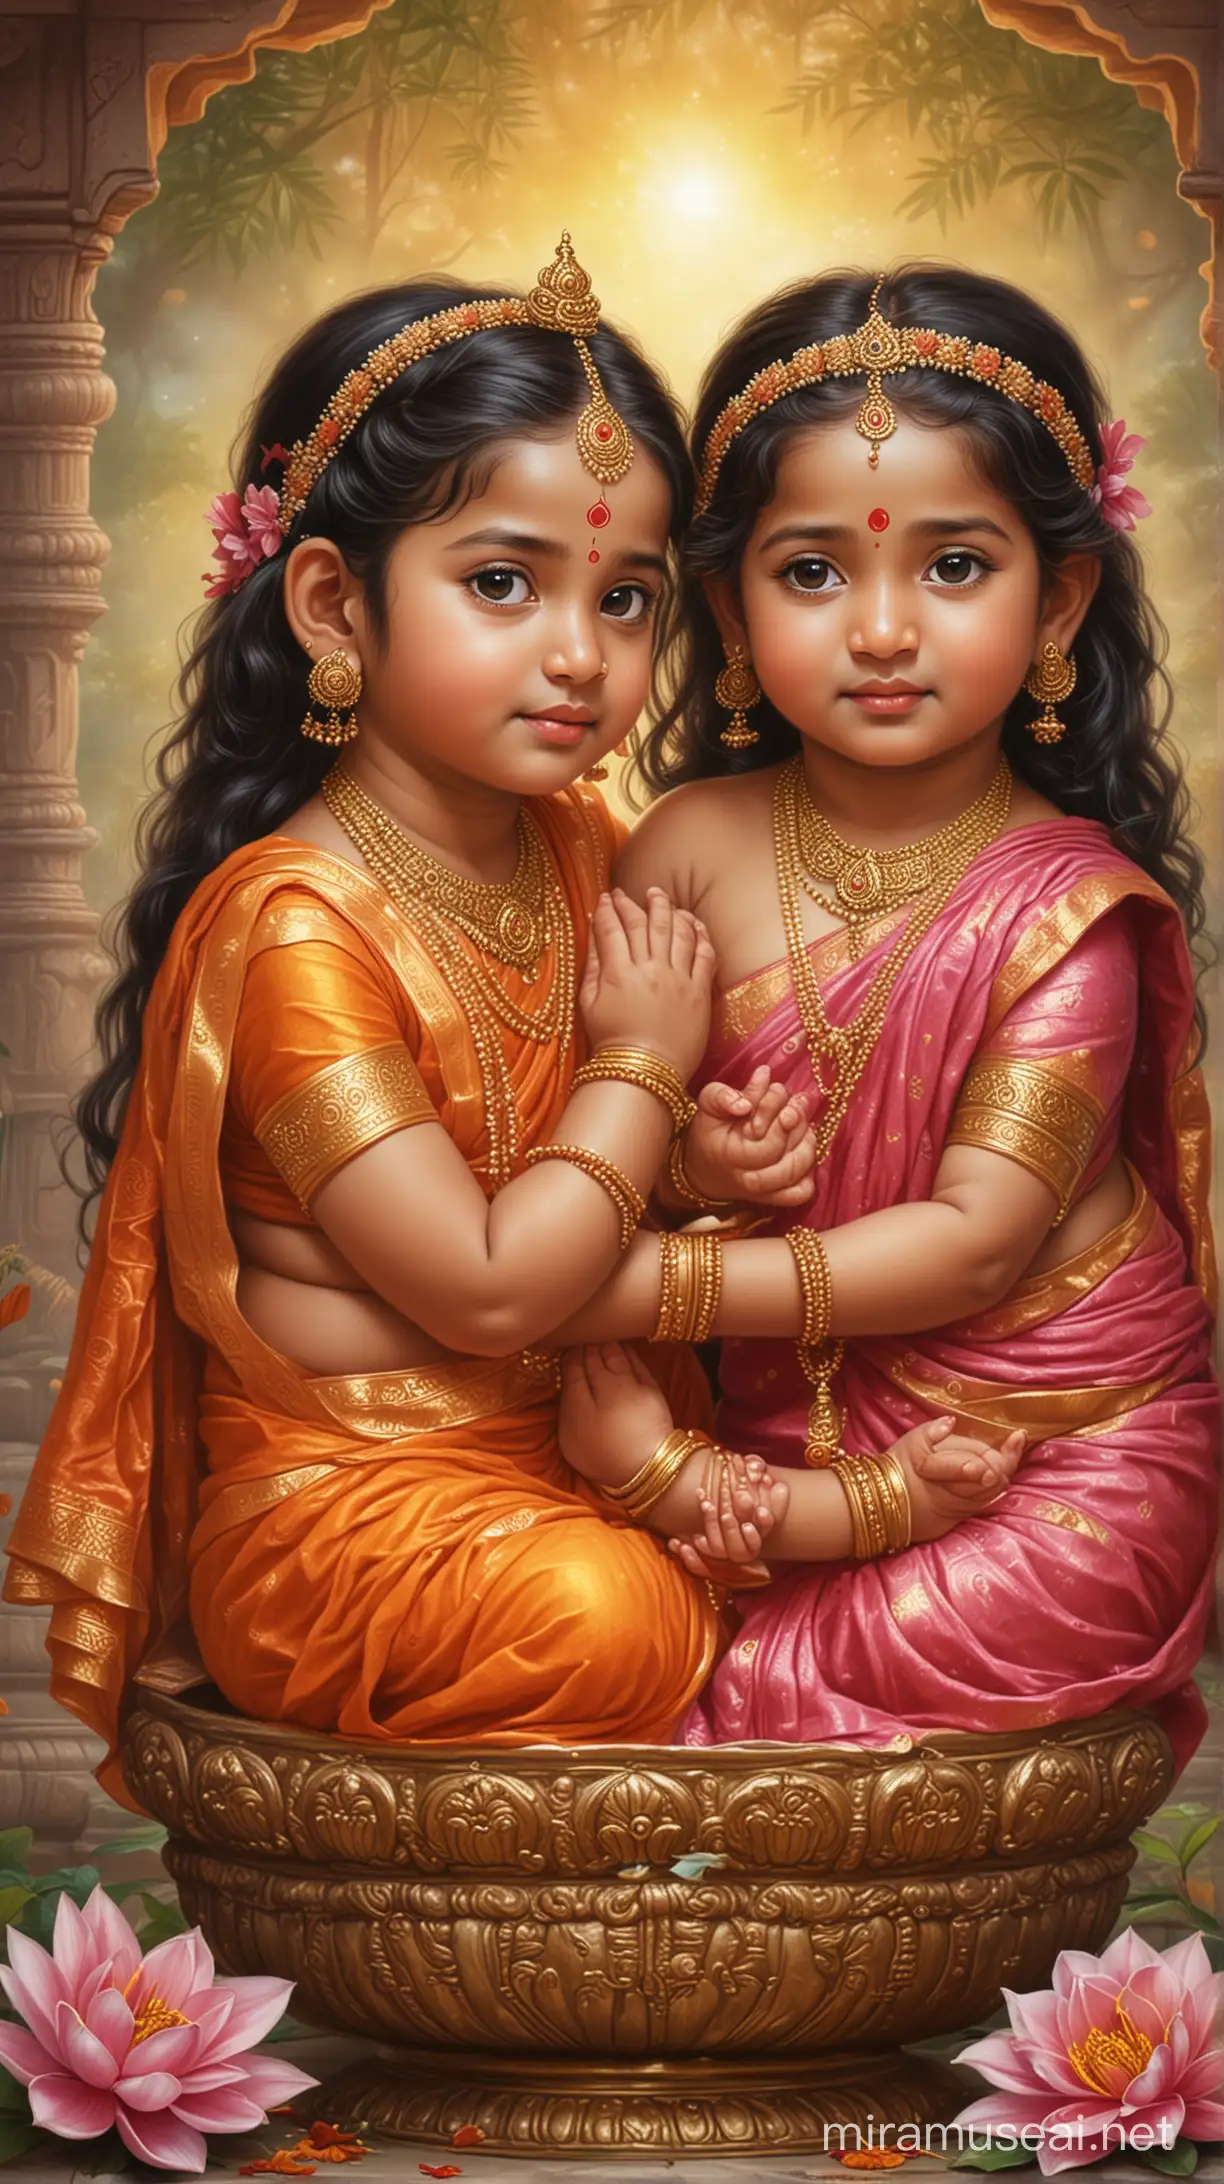 Hindu Goddess Babies Surrounded by Symbols of Love and Prosperity